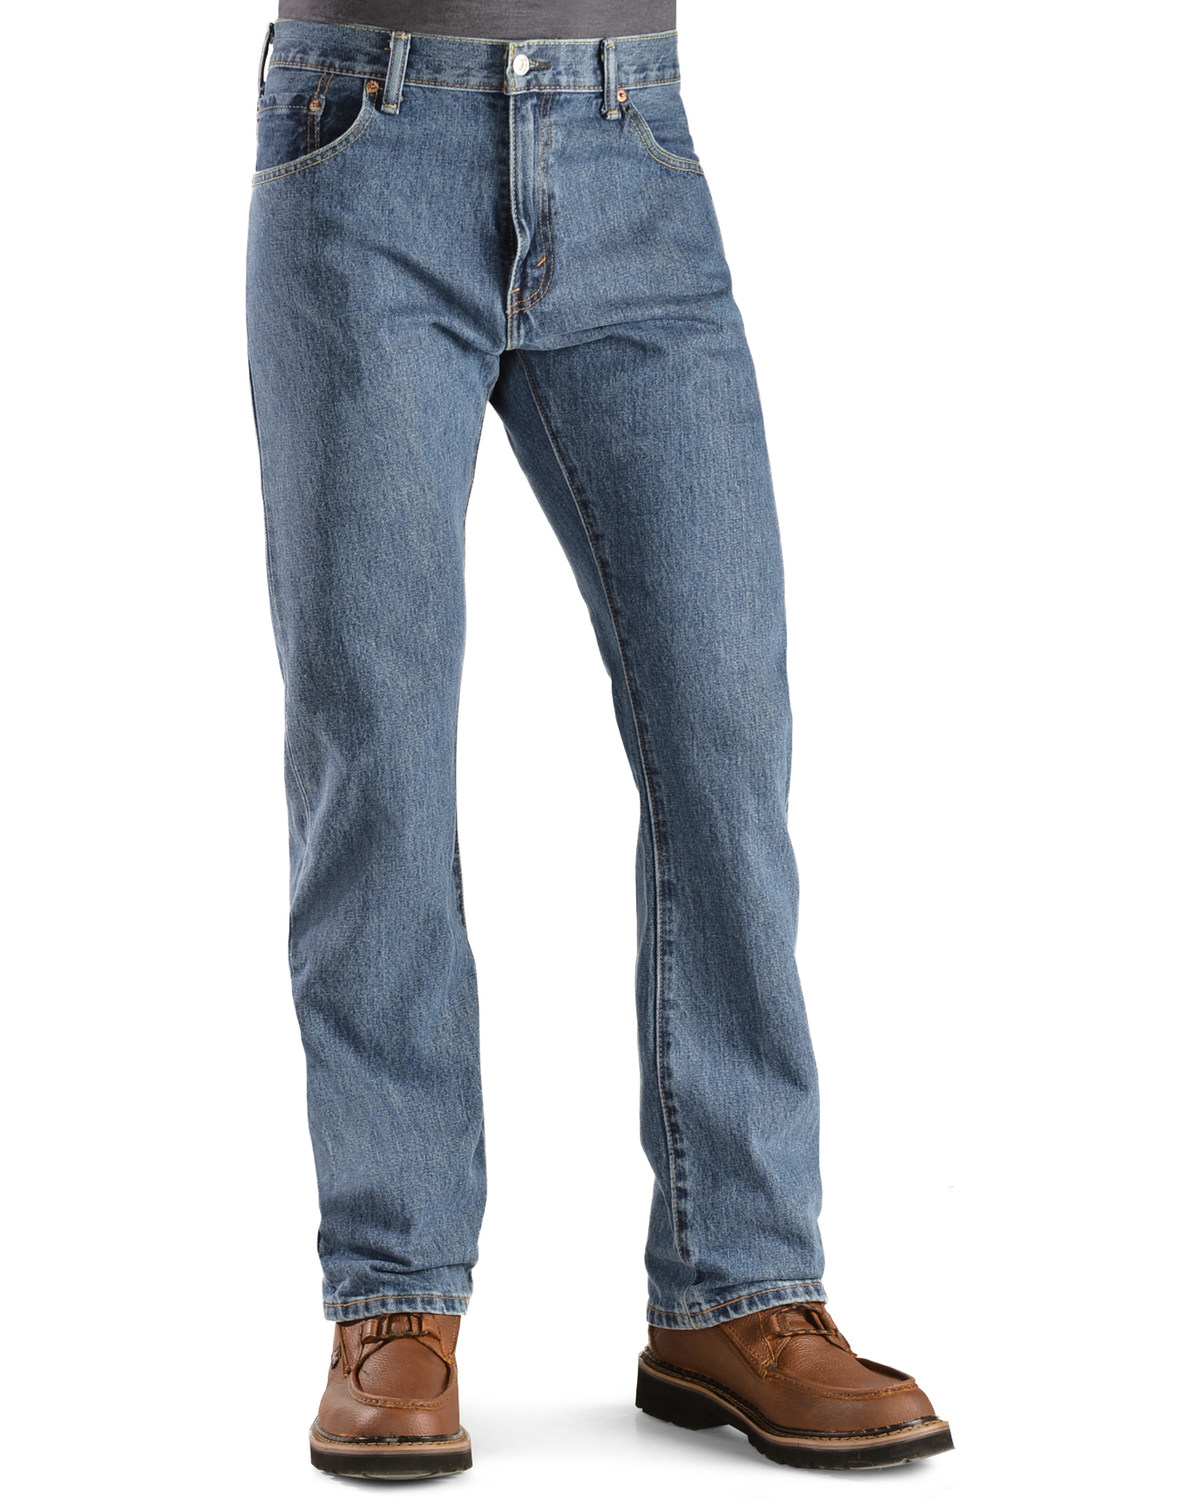 Levi's 517 Jeans - Prewashed Boot Cut | Boot Barn